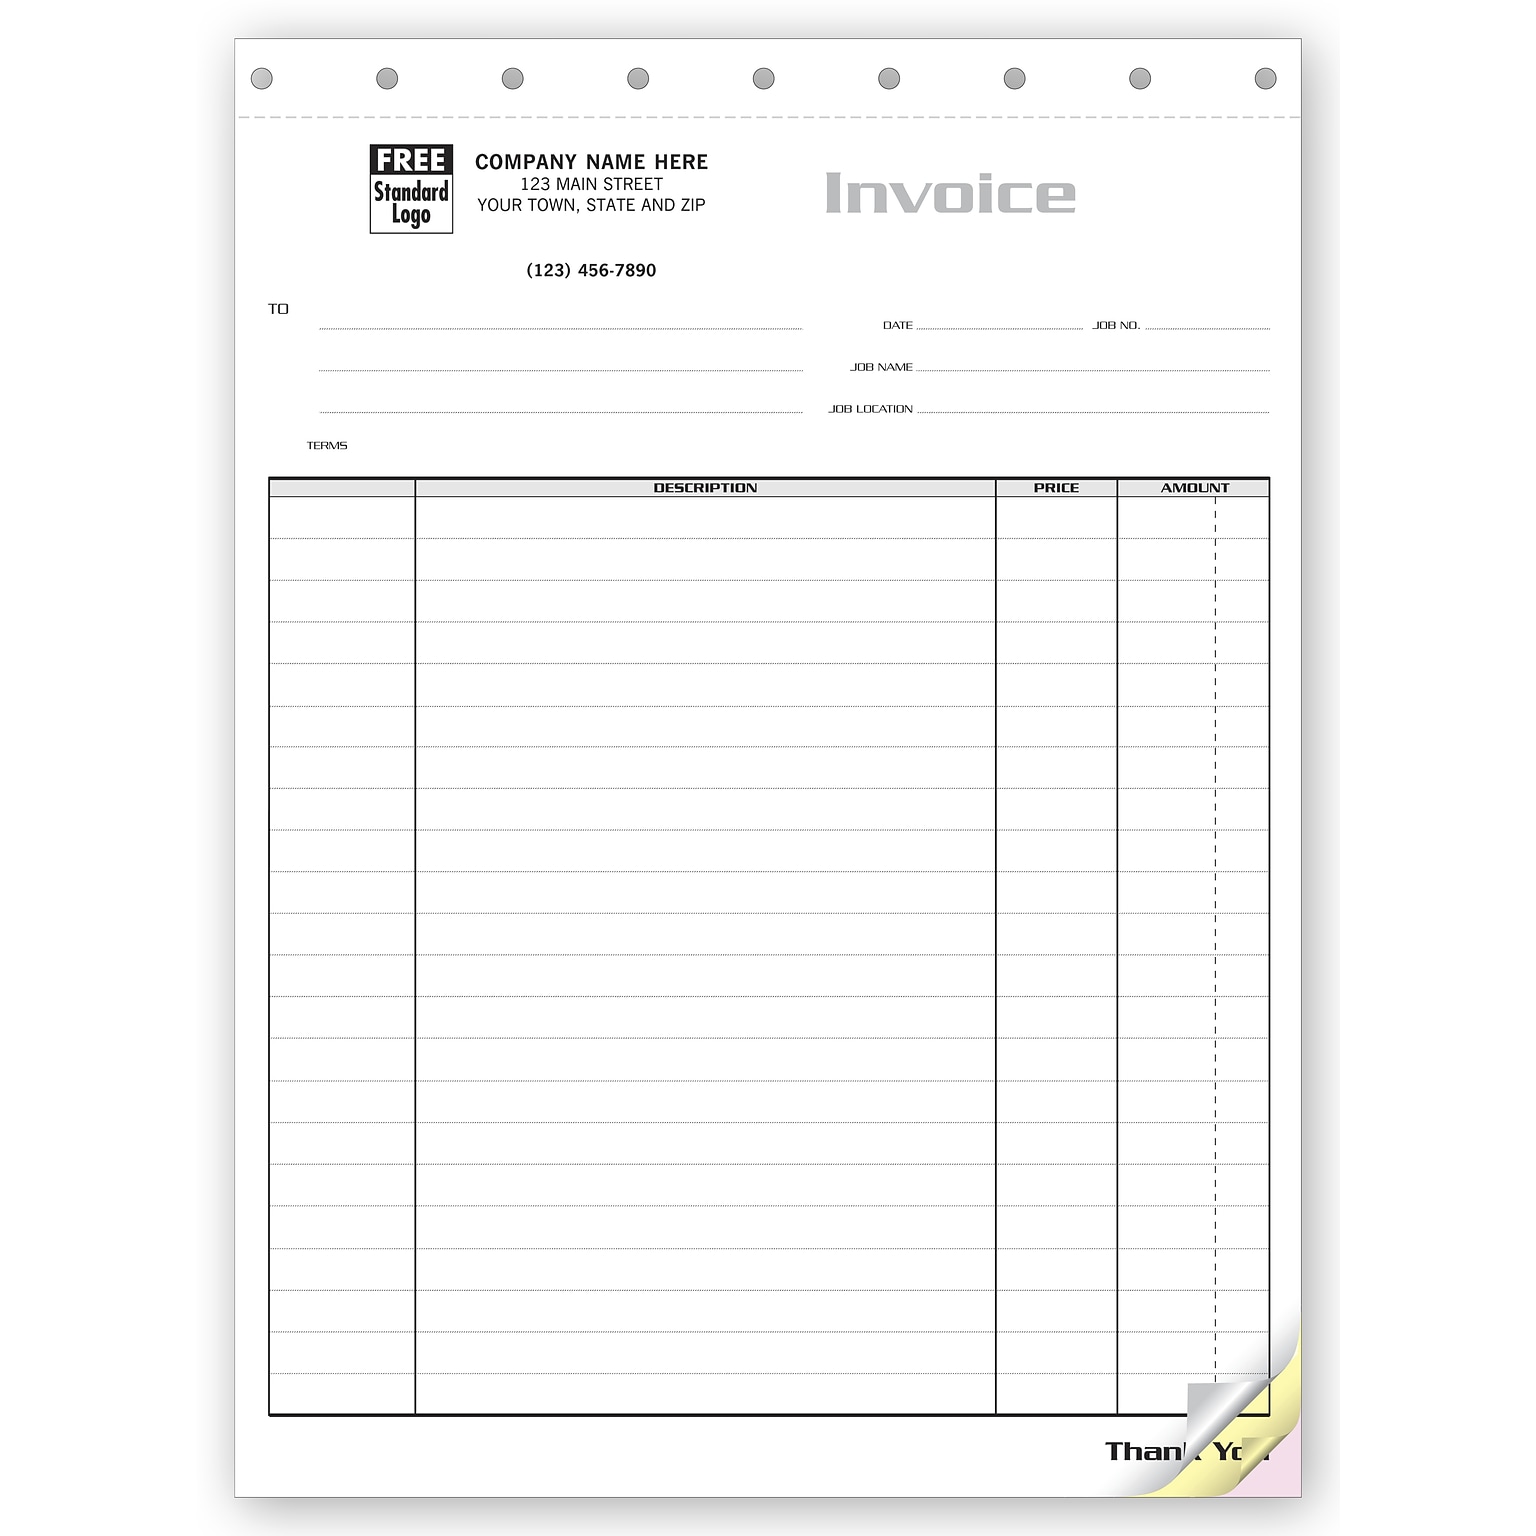 Custom Contractor Invoice - Itemized Invoice for Large Jobs, 2 Parts, 1 Color Printing, 8 1/2 X 11 ,500/Pack